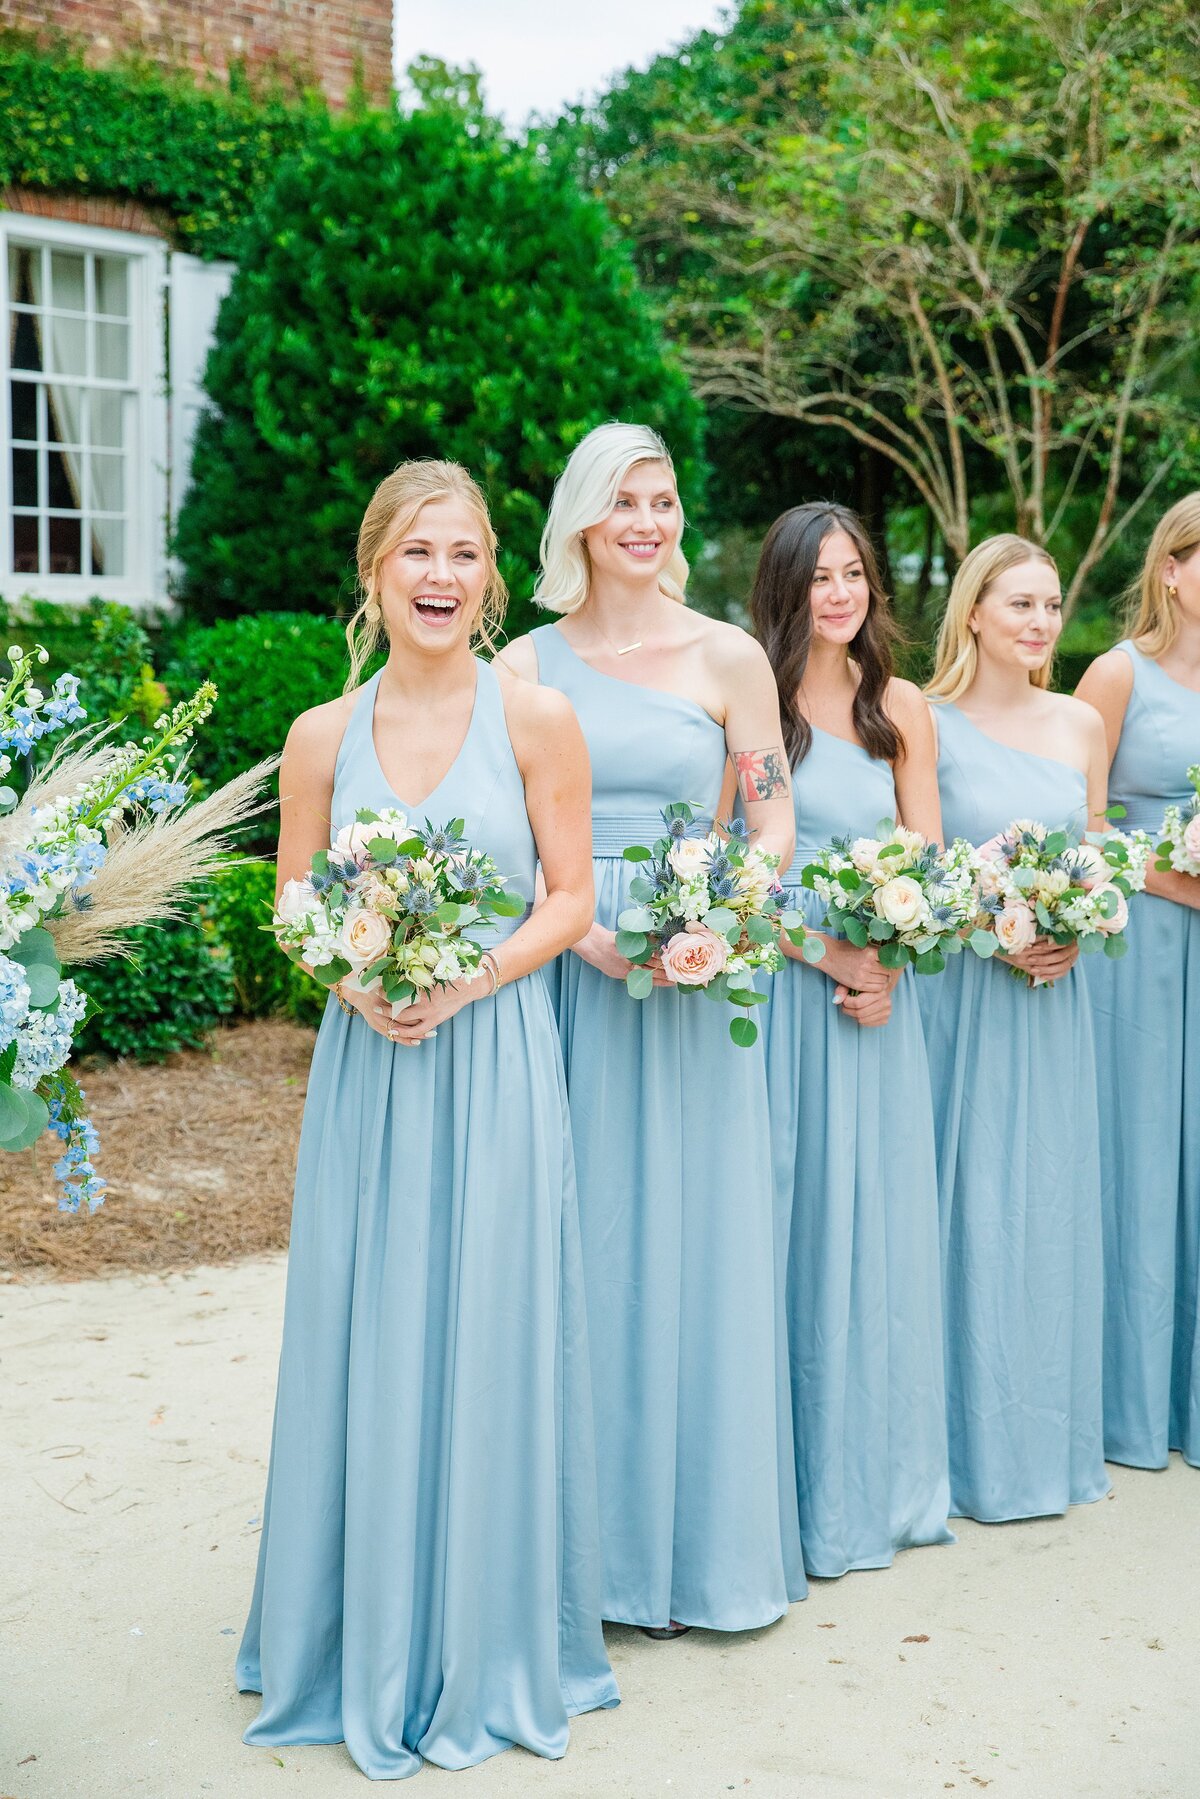 maid of honor cries as her sister walks down the aisle